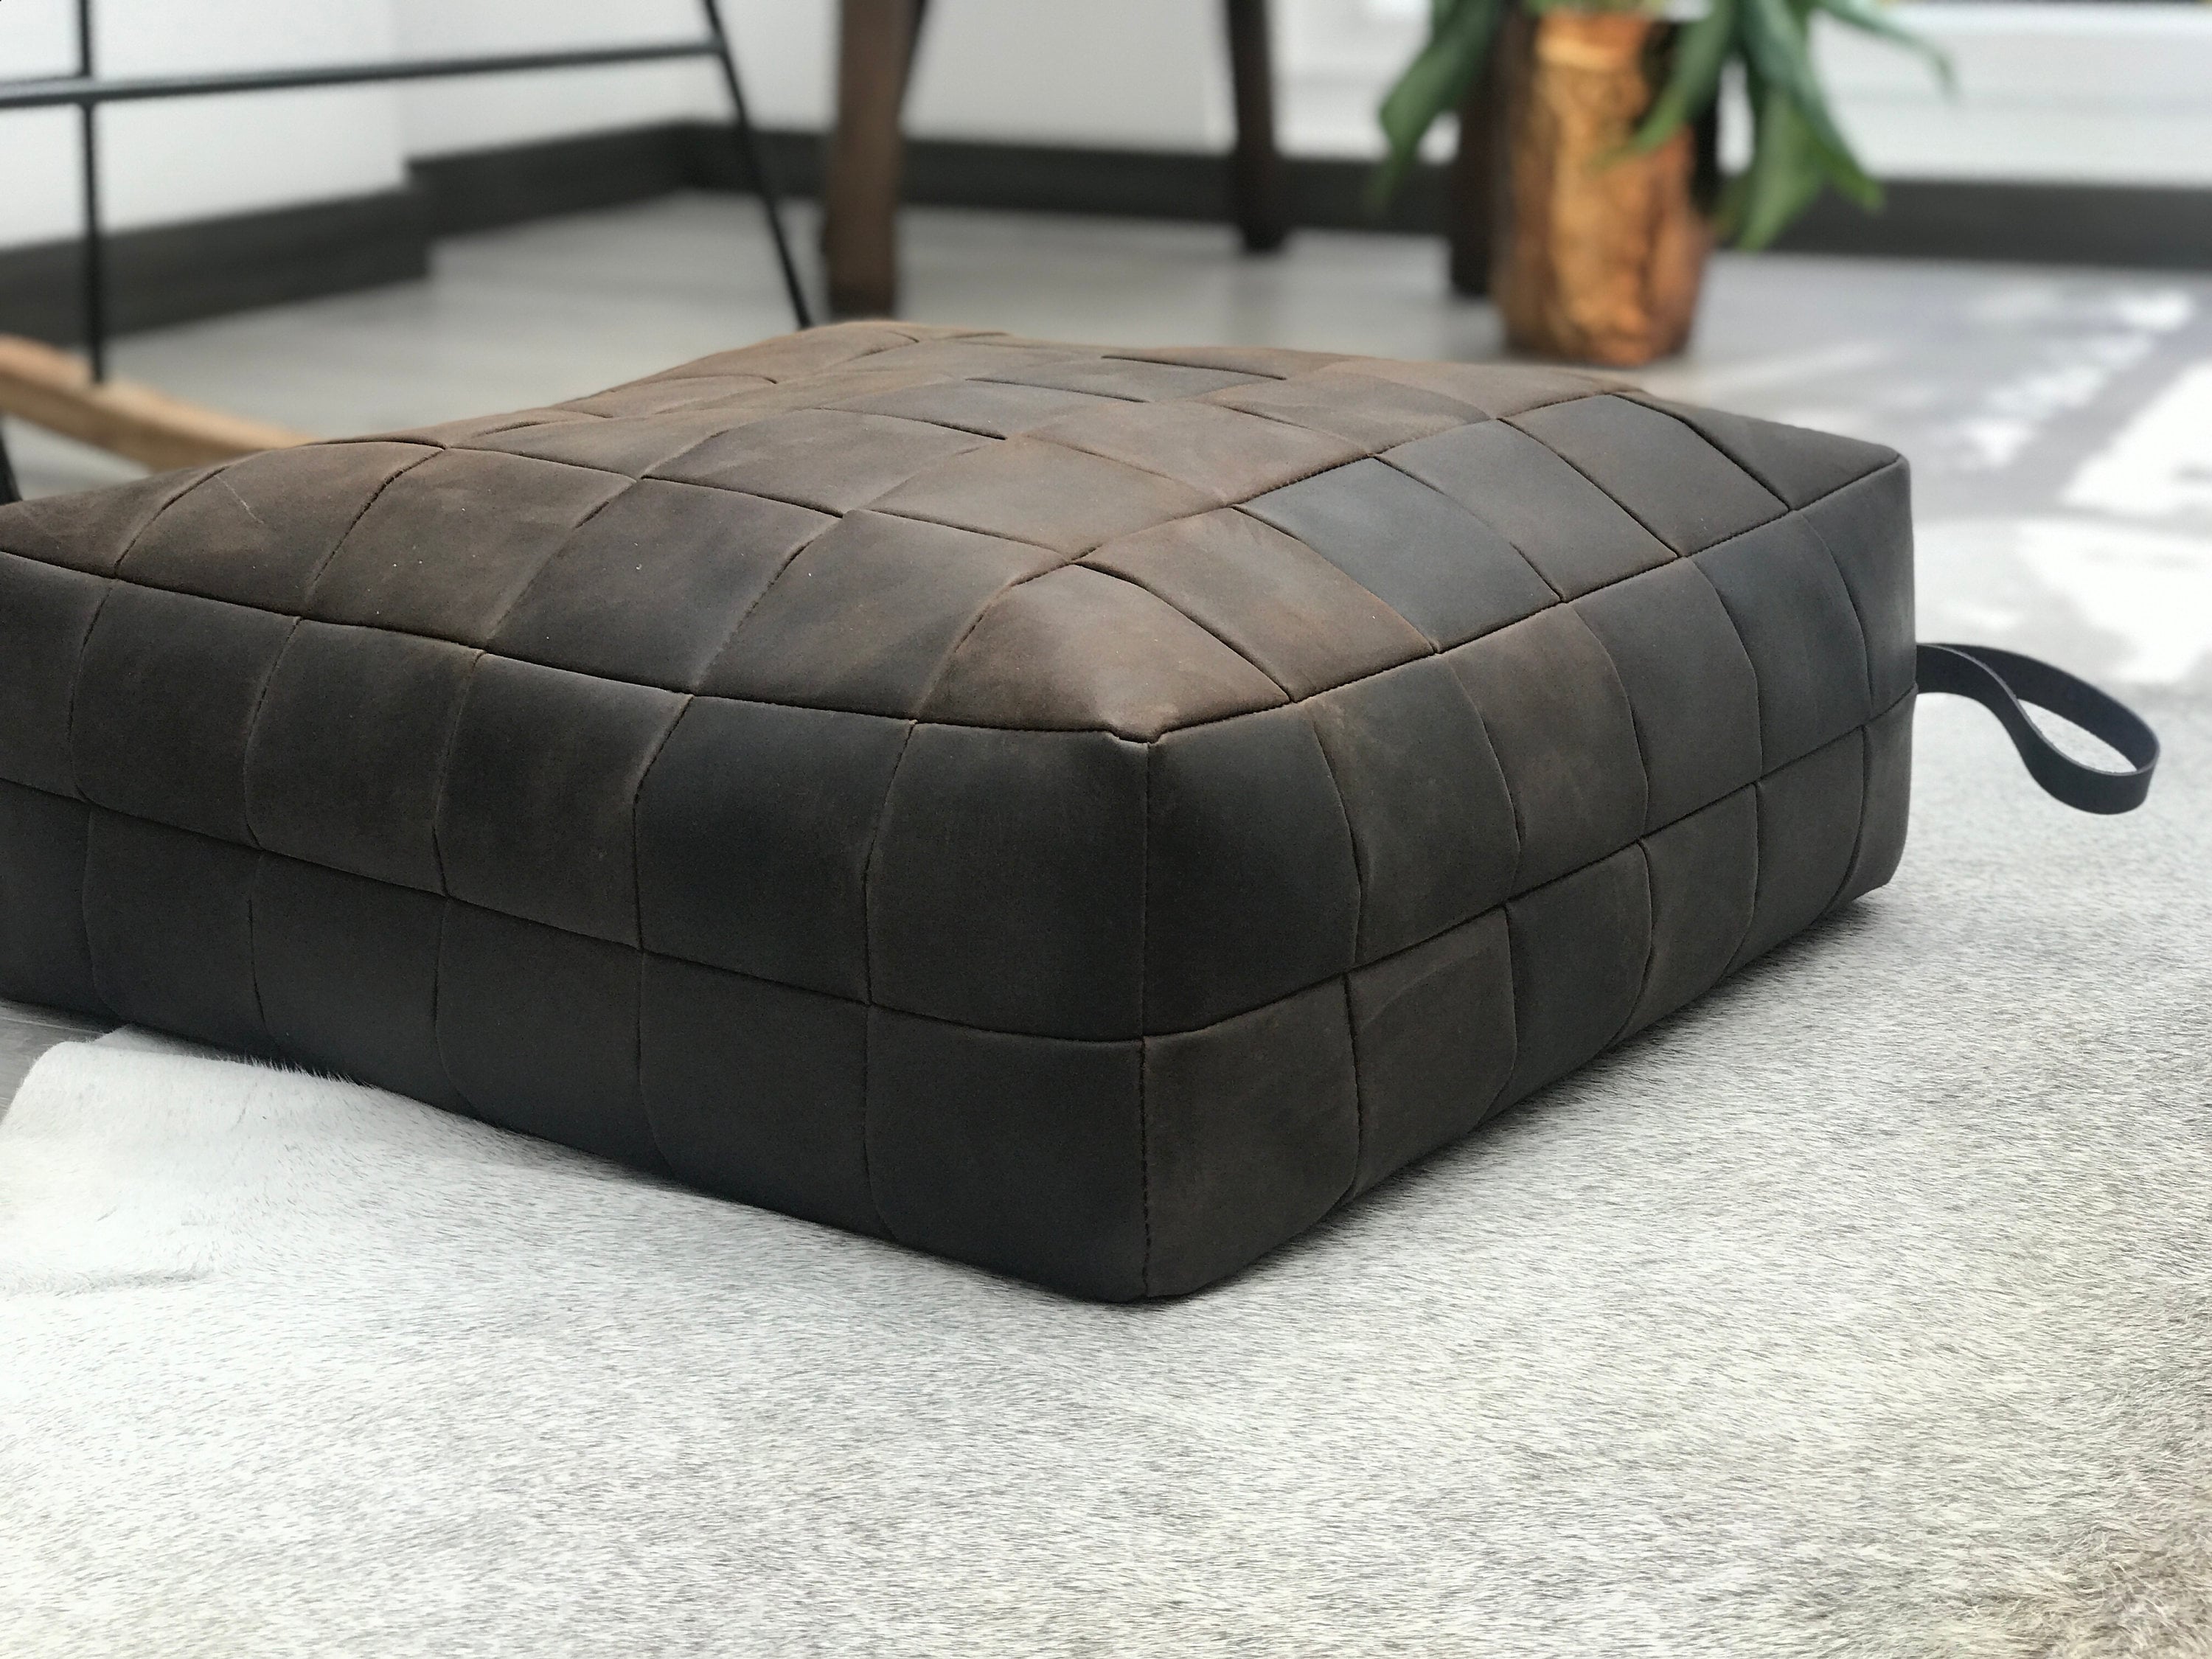 Etsy - Pillow Ottoman Floor Seating. Brown Sweden Leather Cushion Pouf